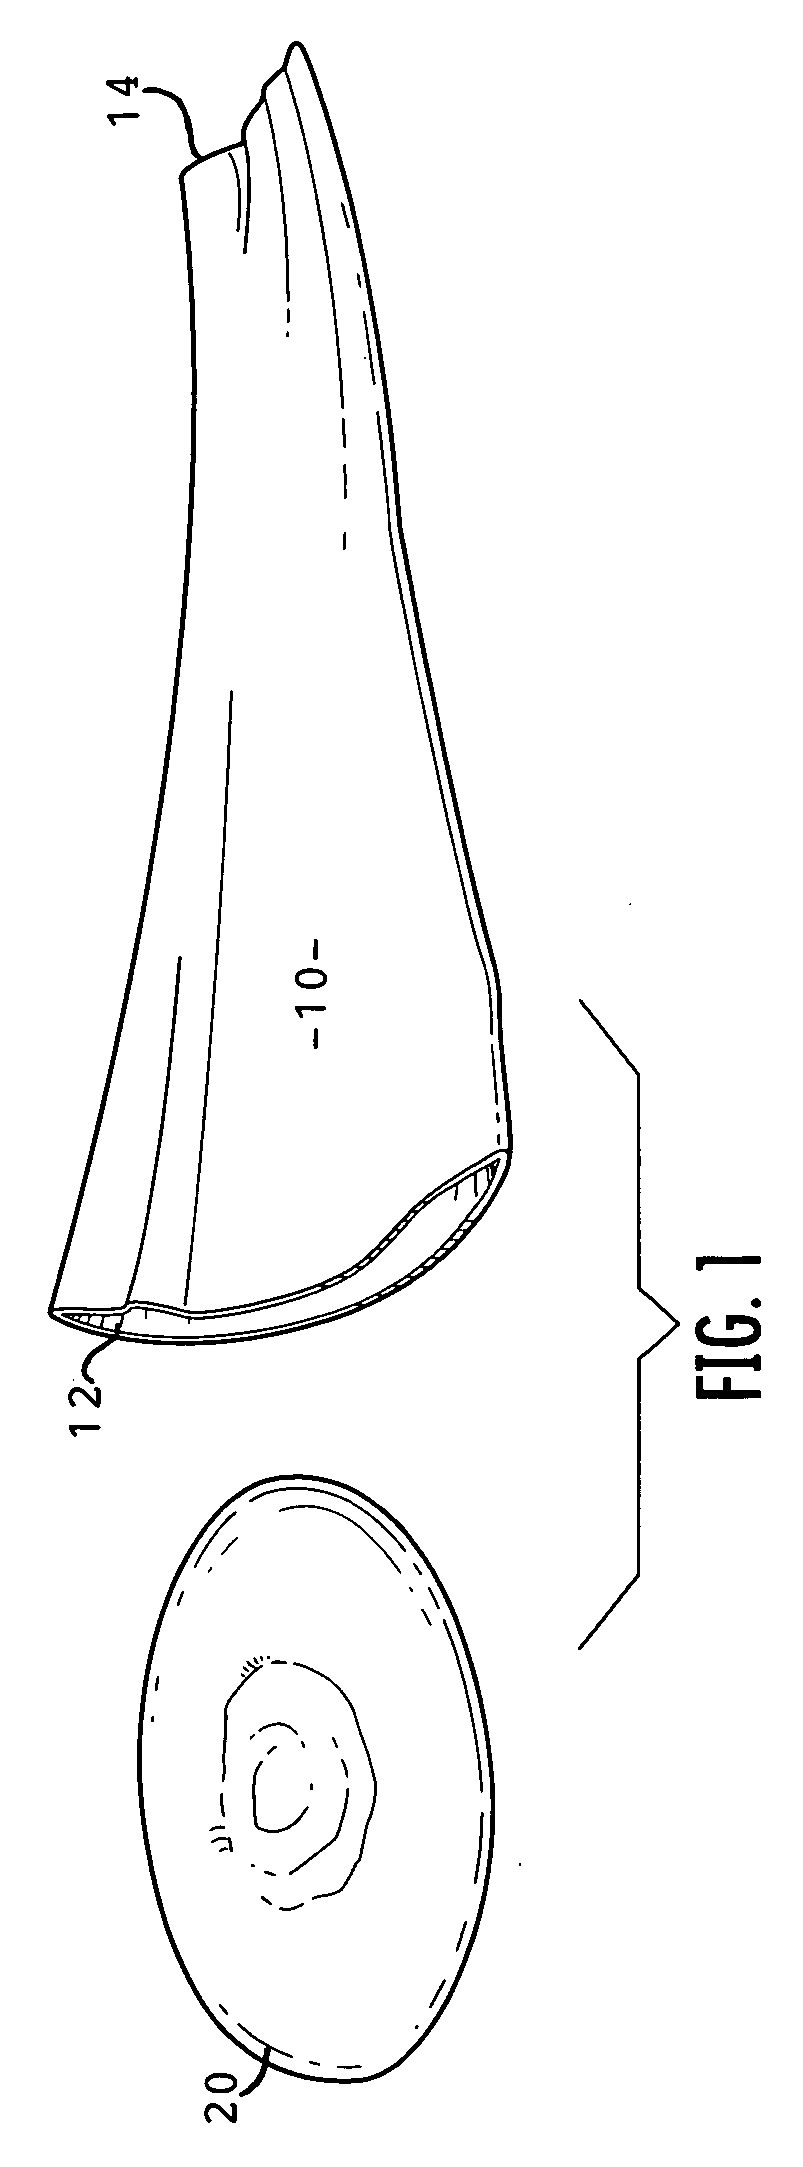 Apparatus and process for delivering a silicone prosthesis into a surgical pocket